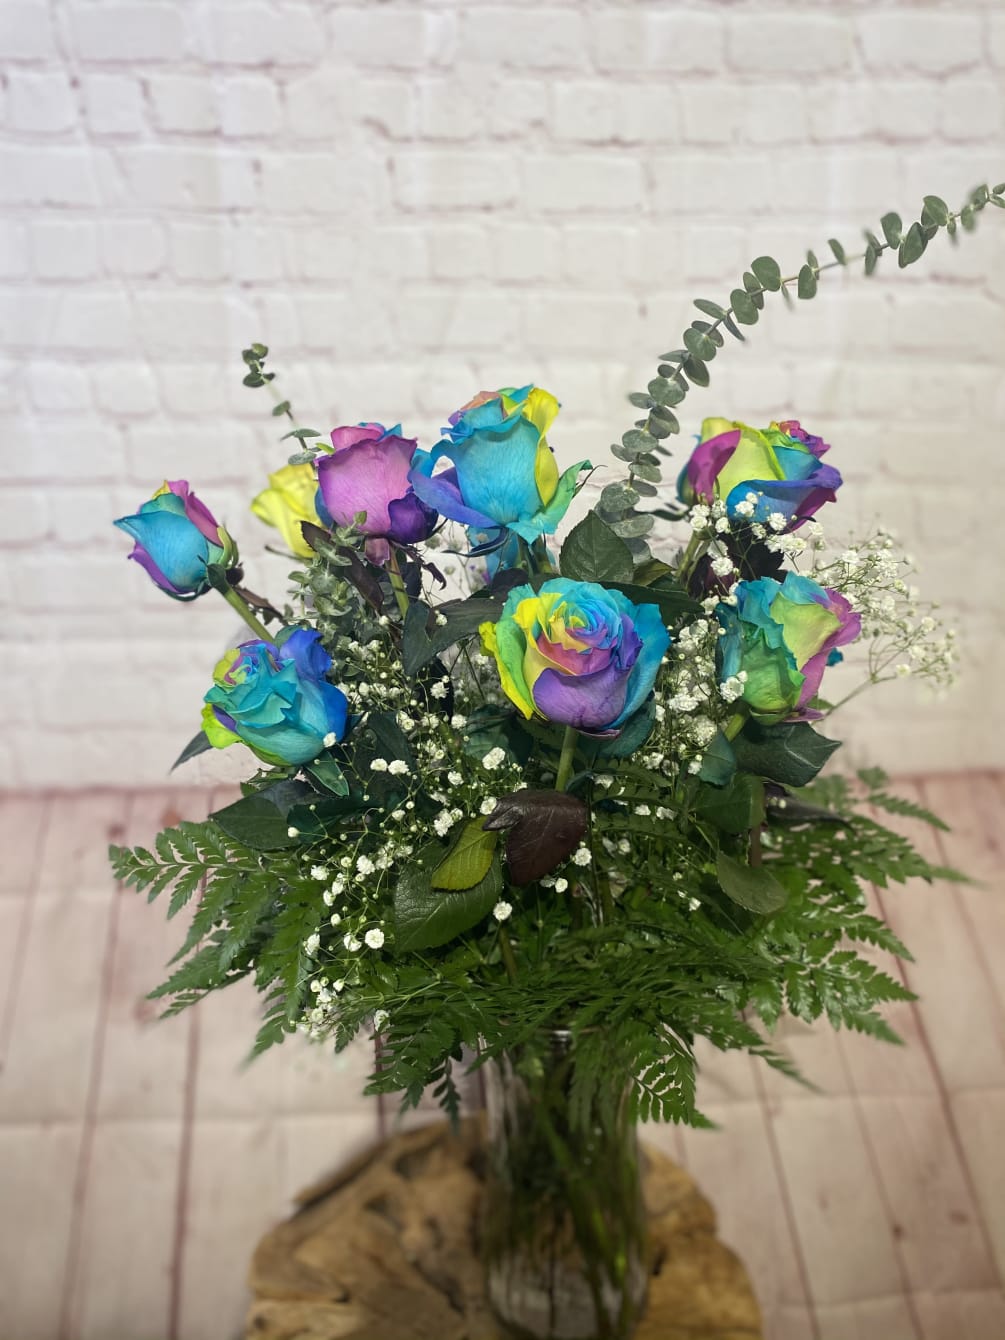 12 long stem rainbow dyed roses with greenery and baby breath. A